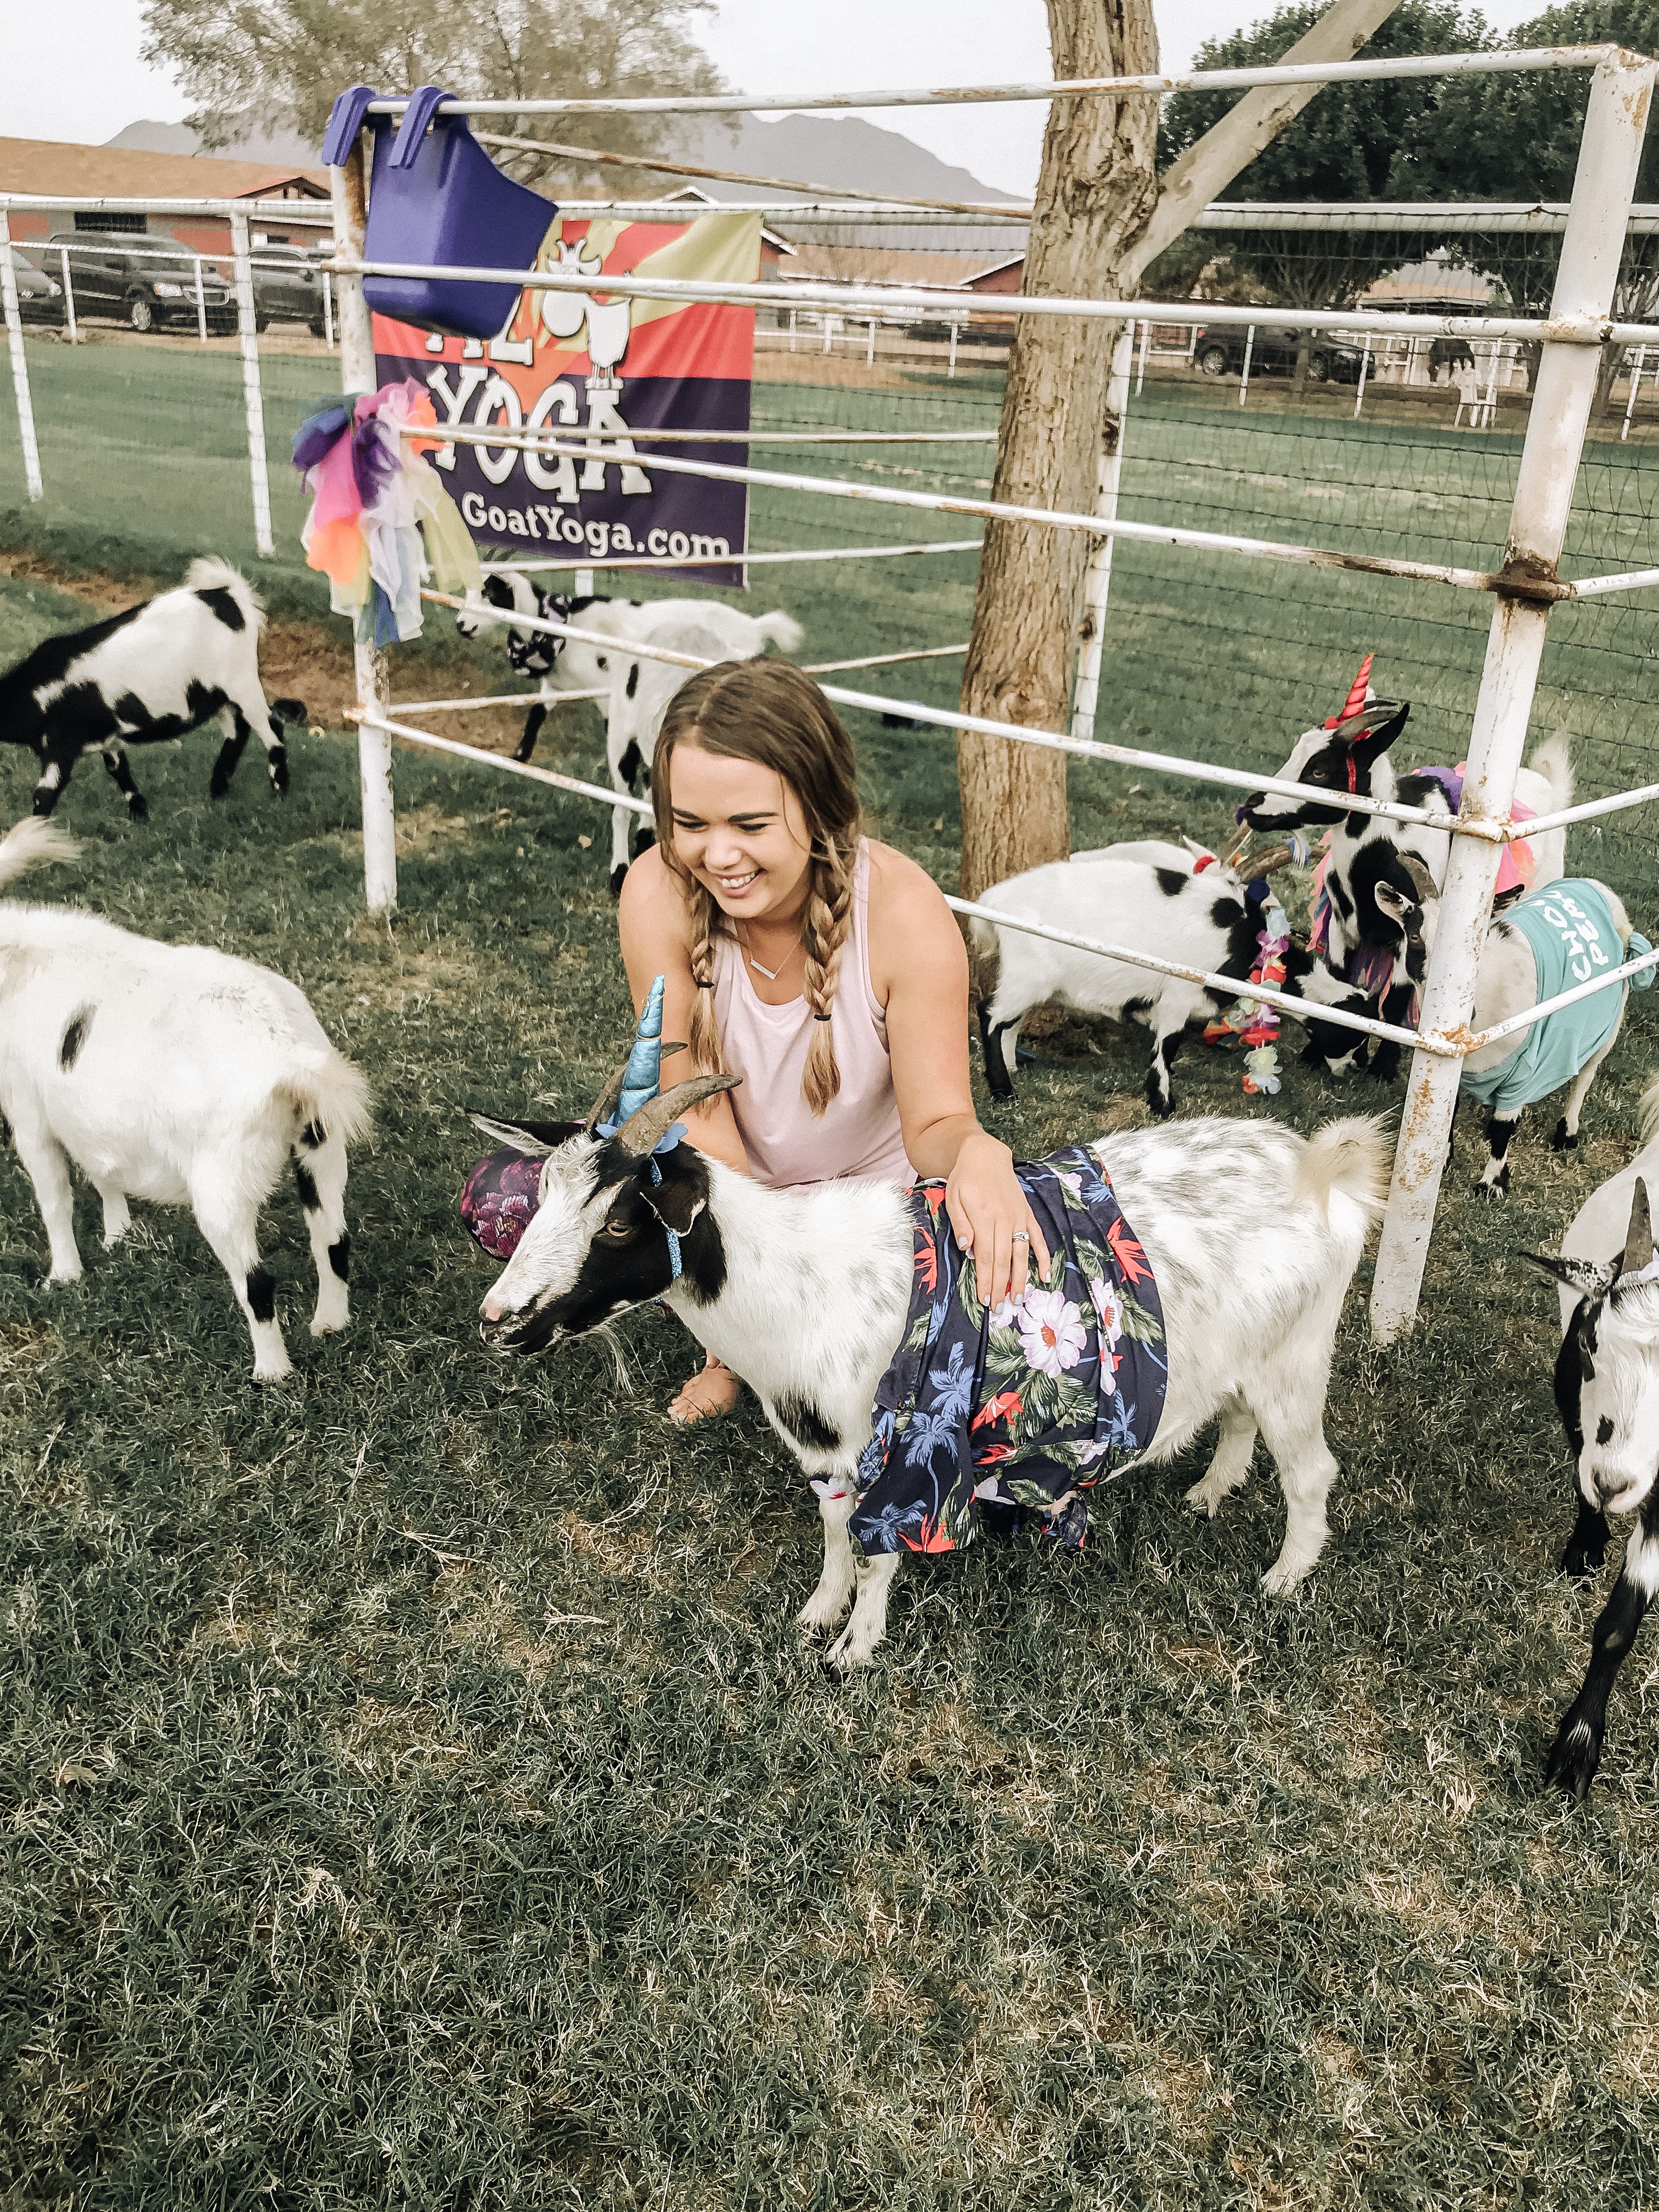 AZ goat yoga | The Best Phoenix Travel Guide featured by top Denver travel guide, All Things Lovely